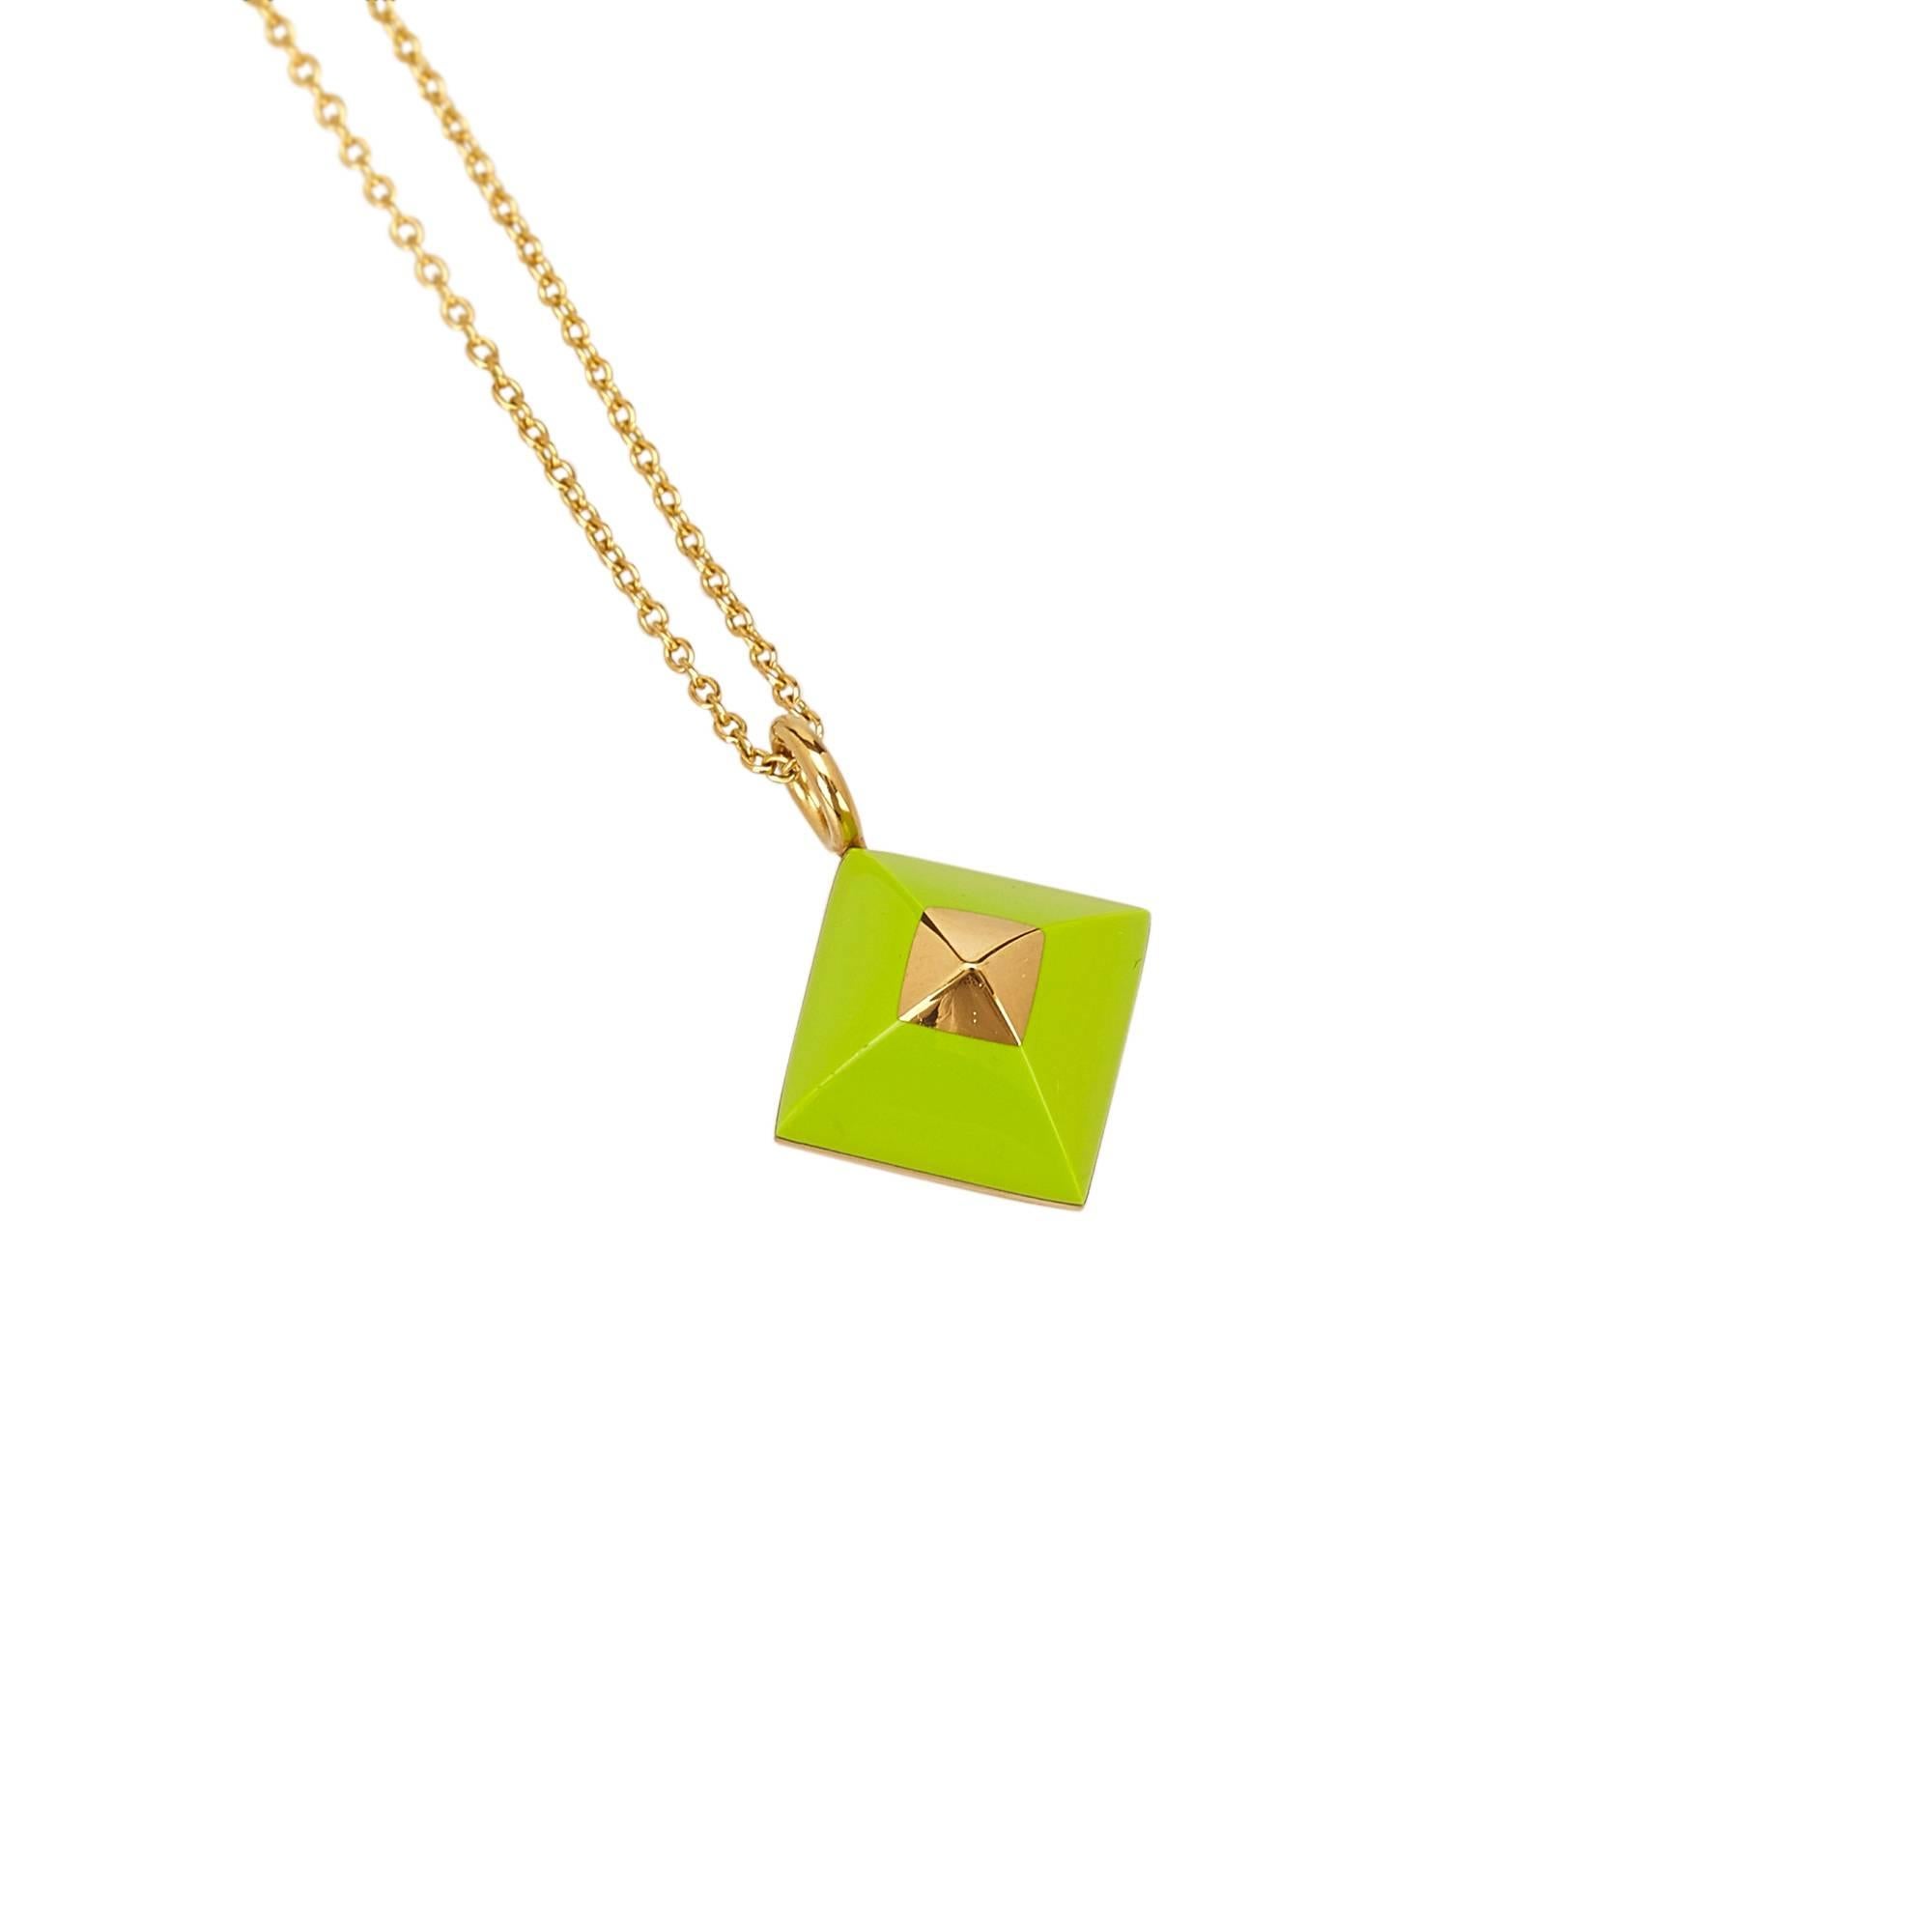 - This green Hermes necklace features a pyramid pendant, gold-tone chain necklace, and a spring ring closure. Nice colour and fashionable Hermes  necklace is great for summer wear. 

- Made in France. 

- Size: 1.6cm x 1.6cm. 

- Circumference: